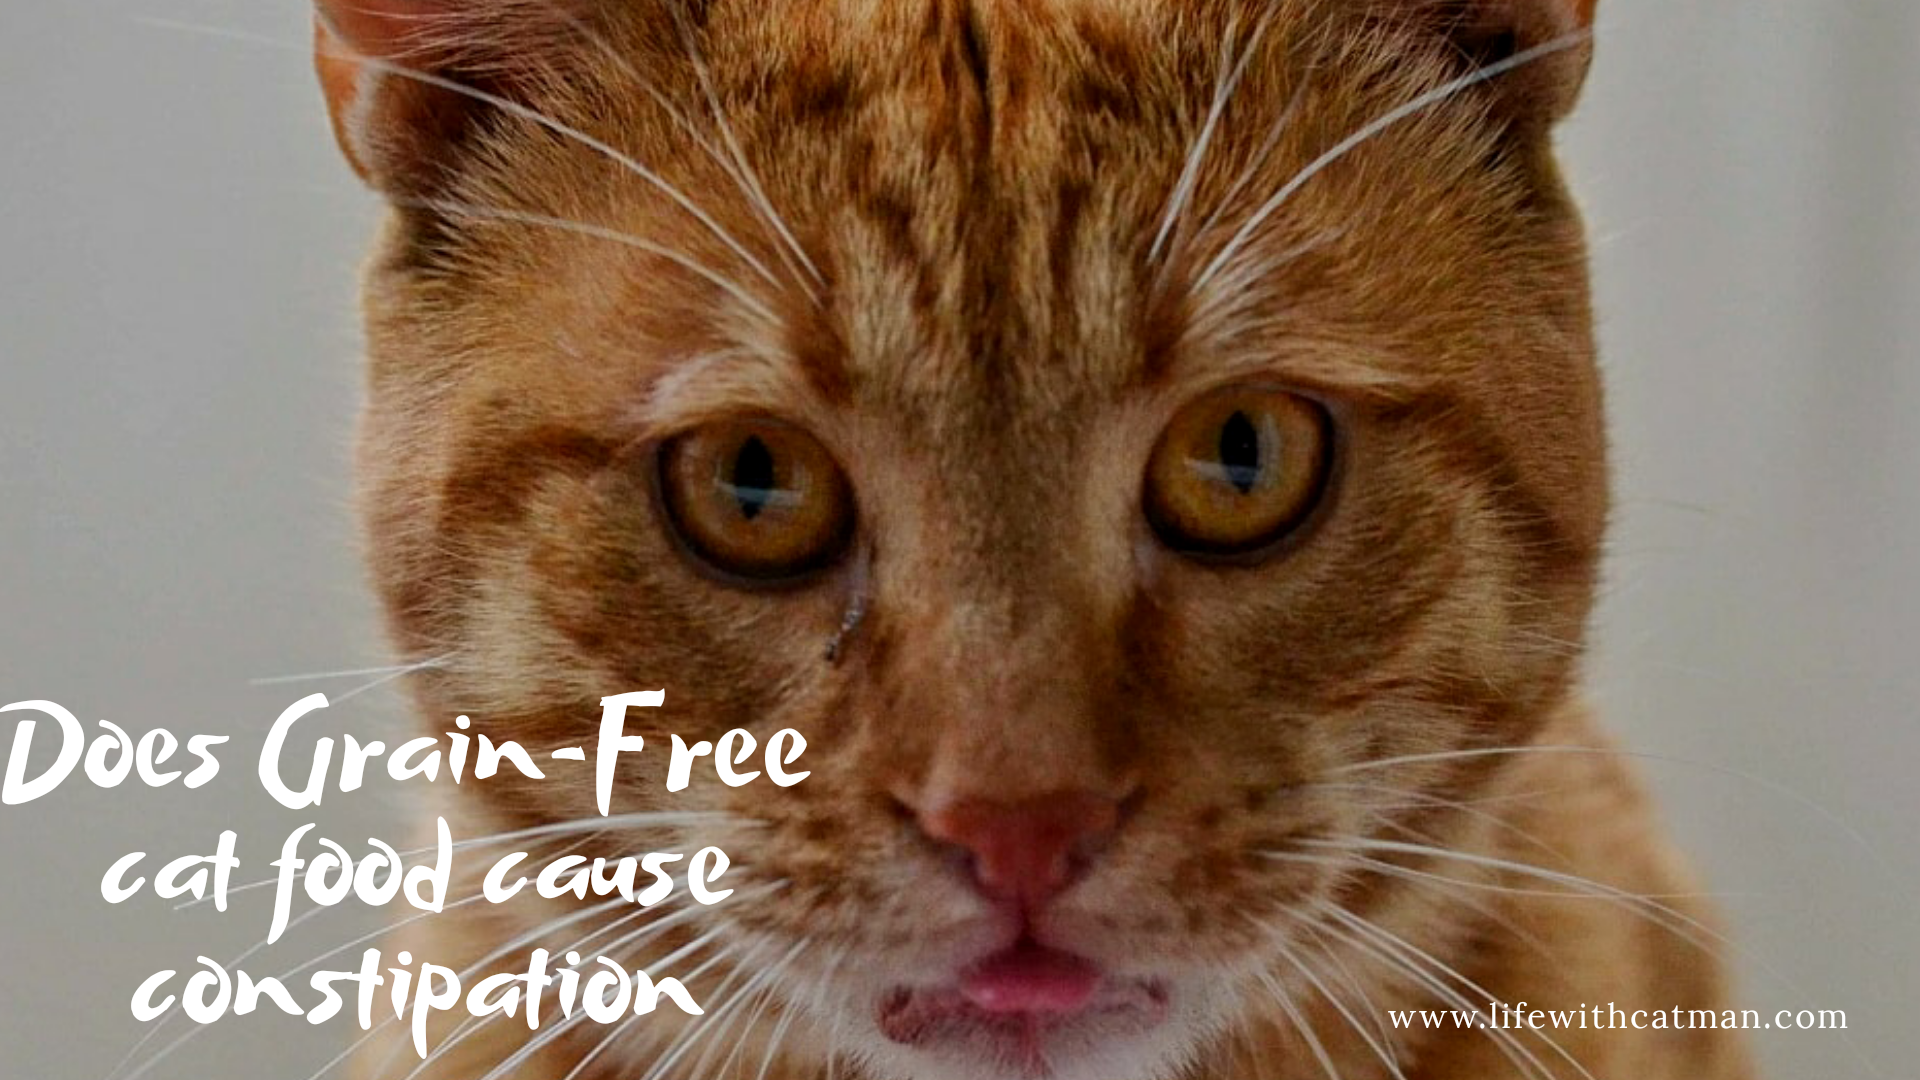 Does grain-free cat food cause constipation